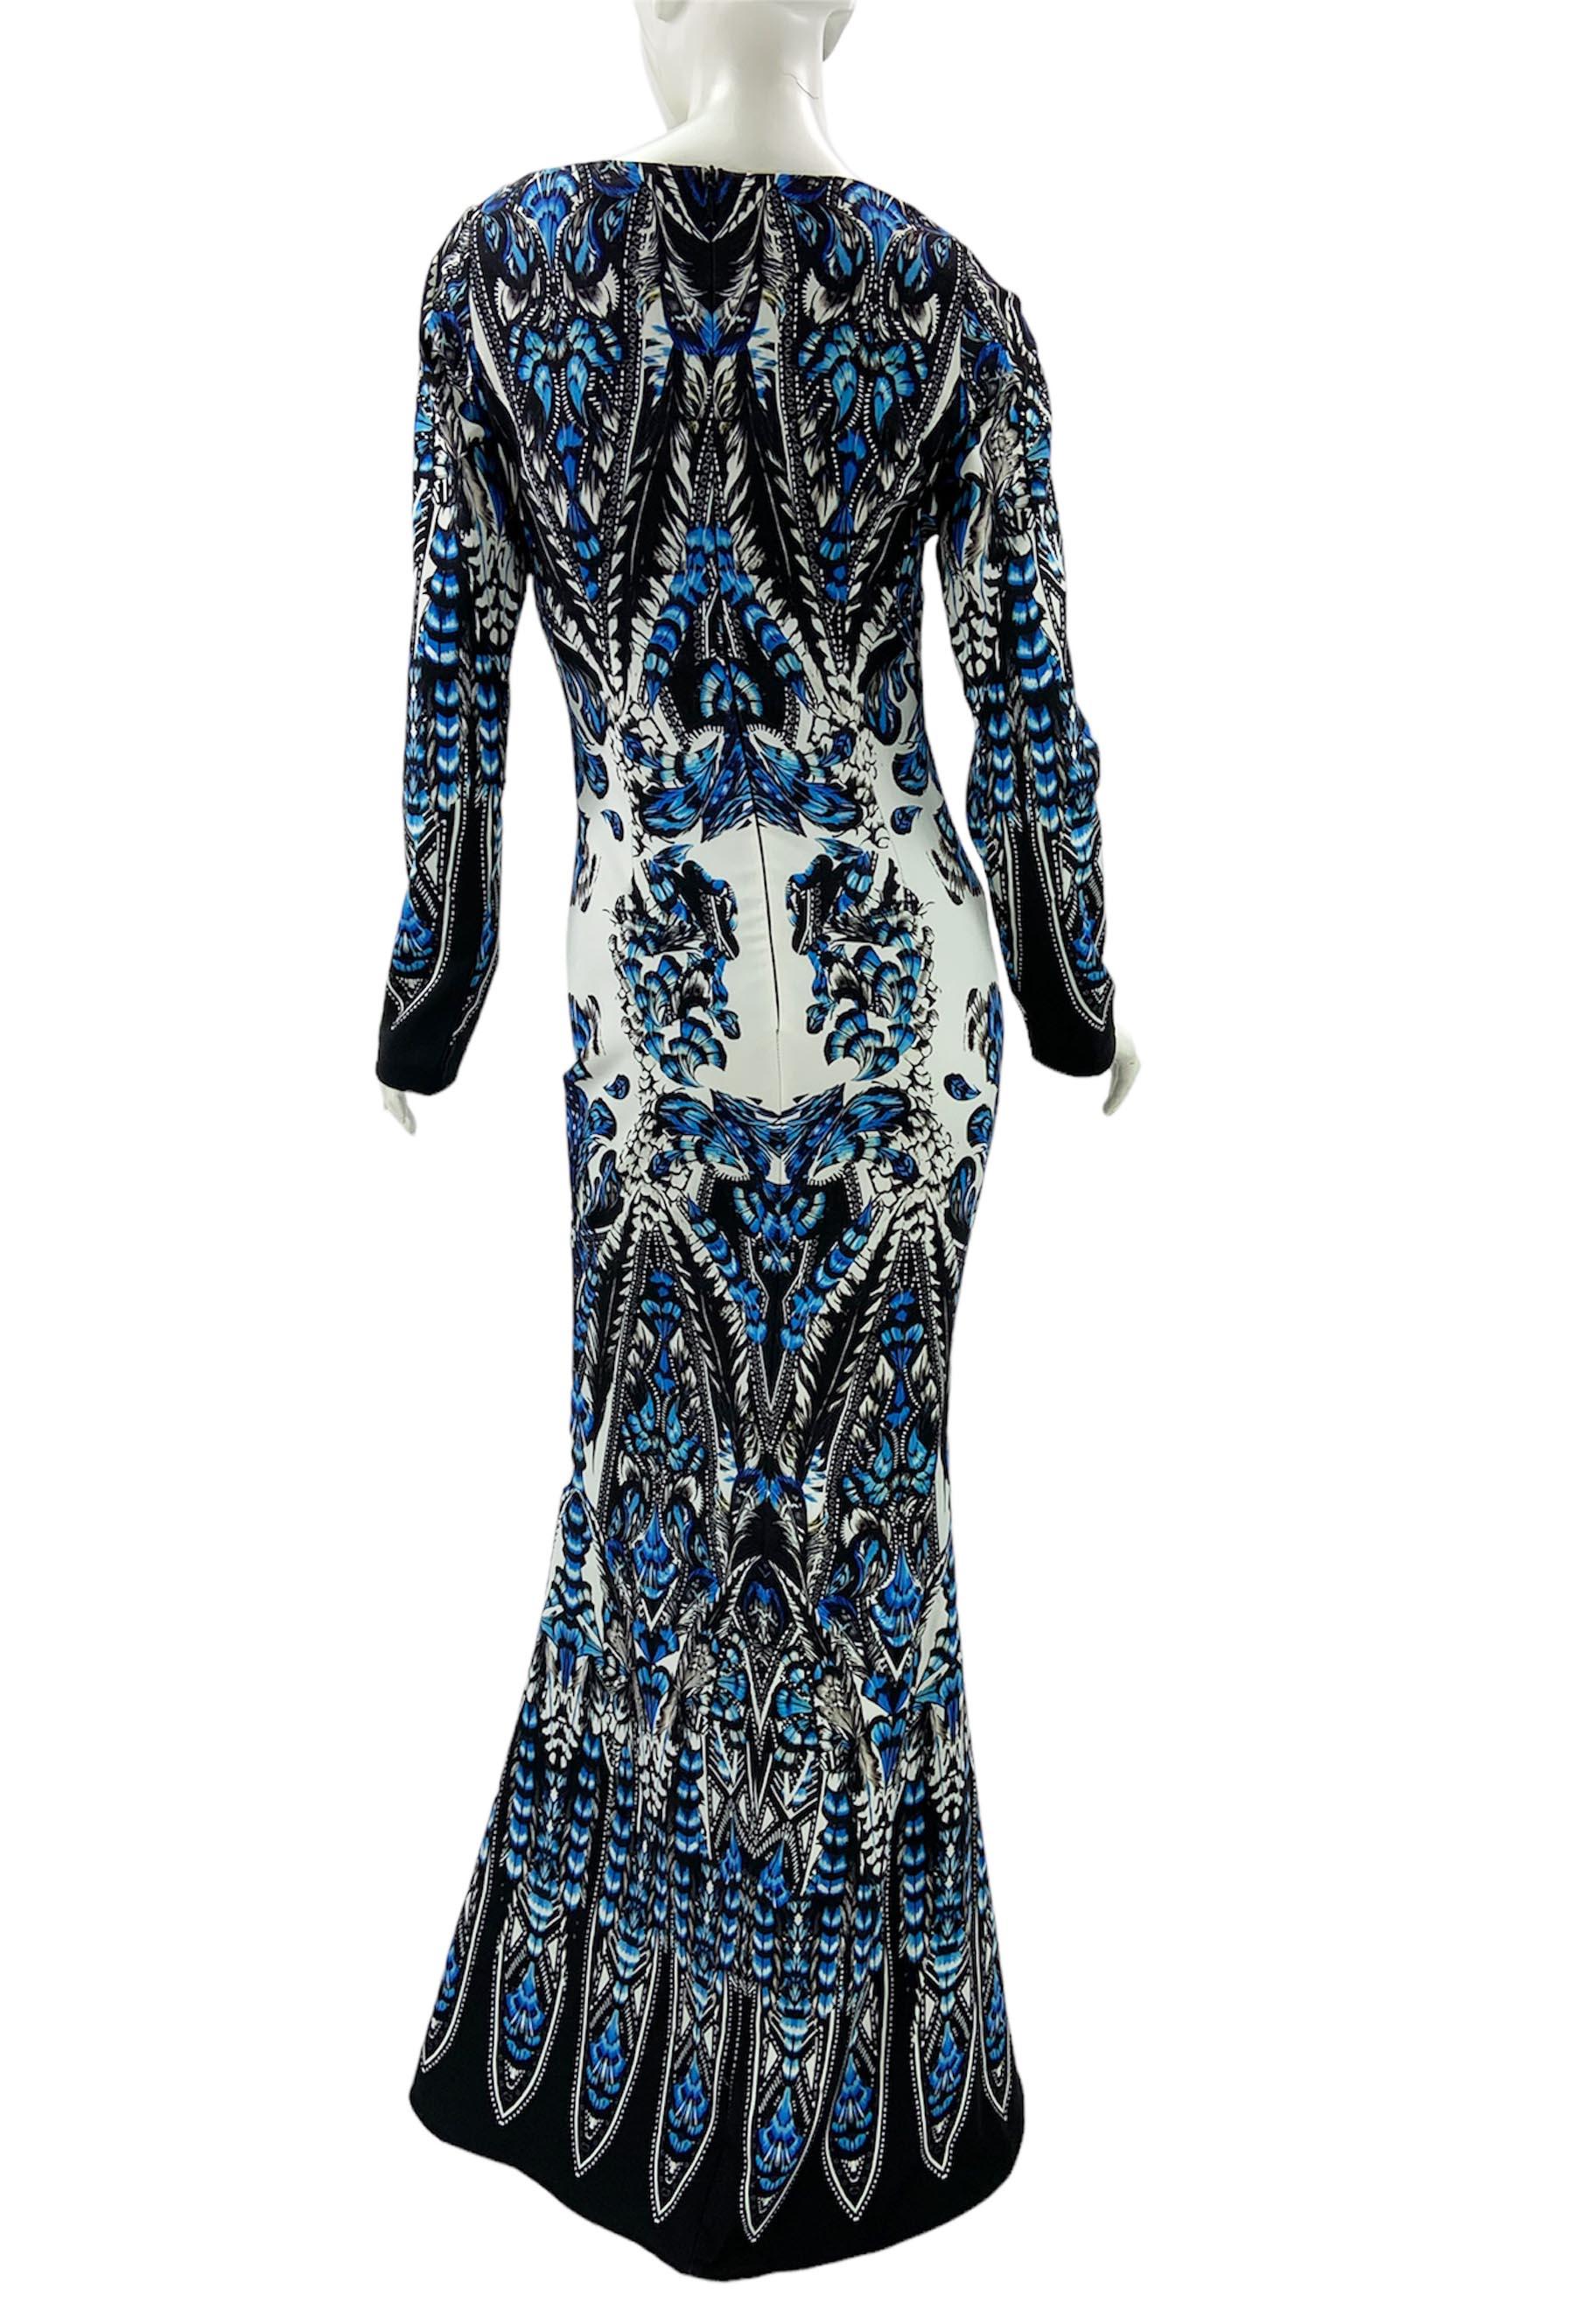 New Roberto Cavalli Feather Print Blue White Dress Gown Italian 36 In New Condition For Sale In Montgomery, TX